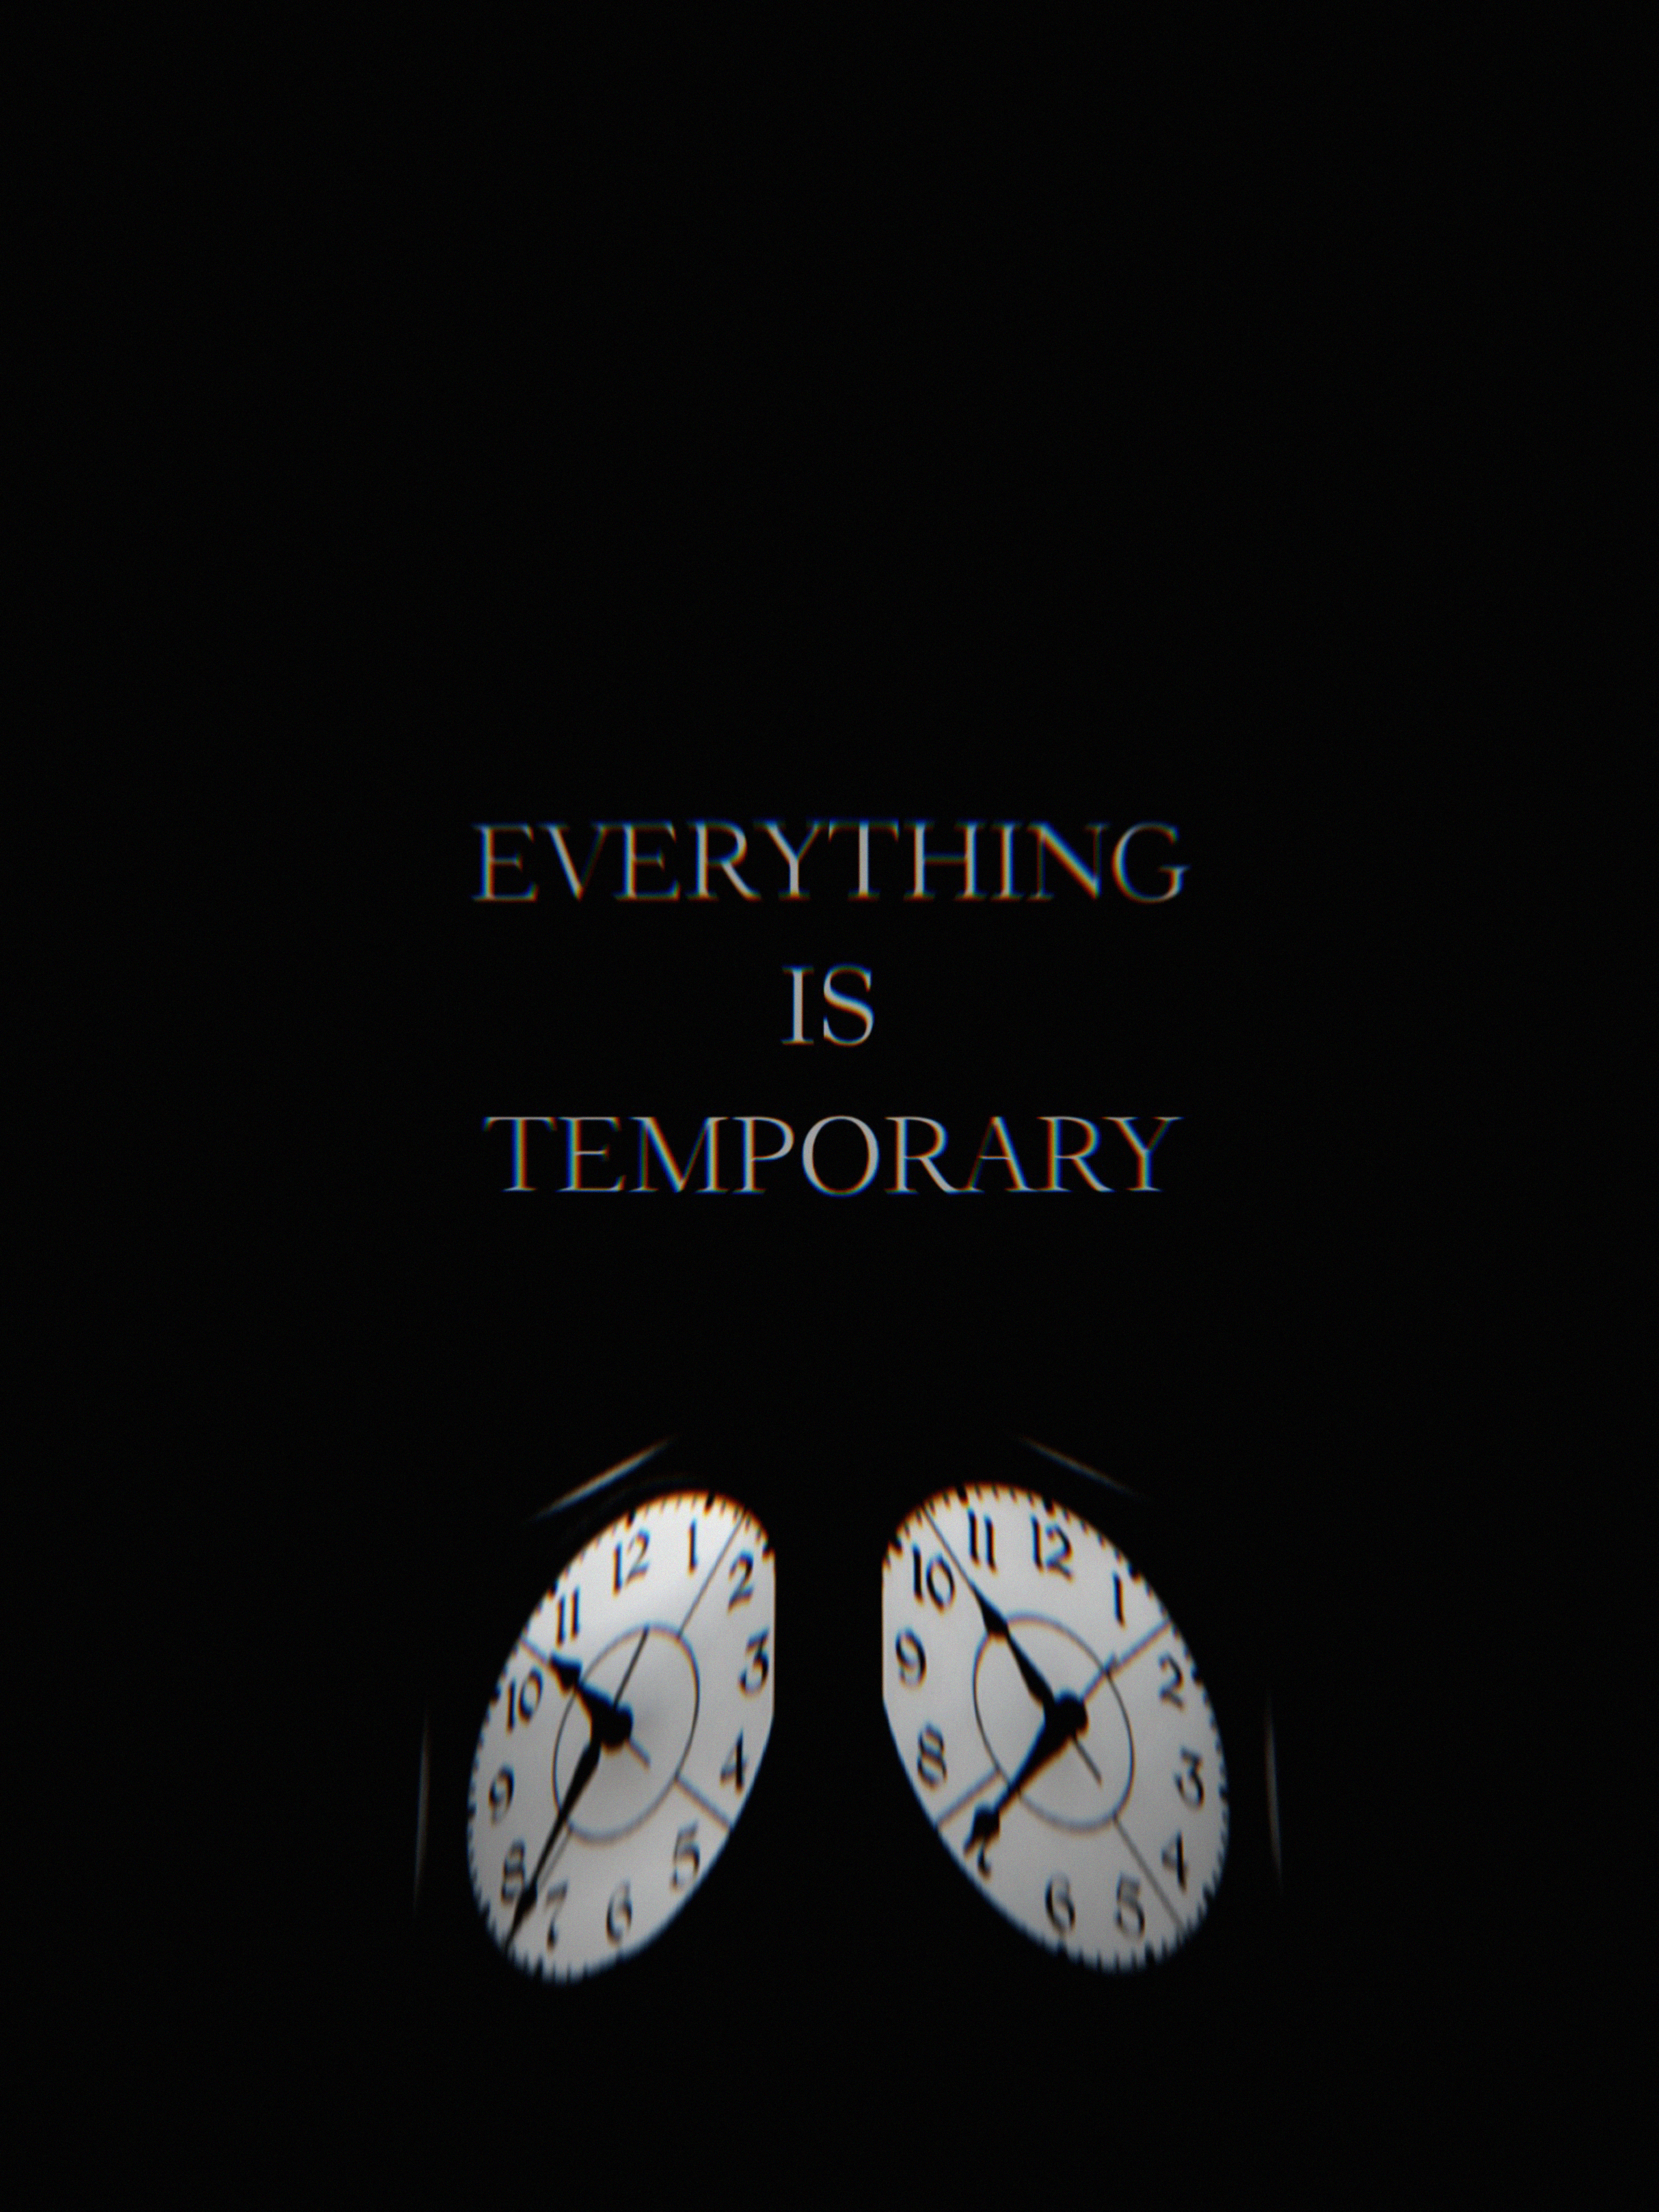 138972 download wallpaper words, life, clock, glitch, time, it's time, temporary screensavers and pictures for free